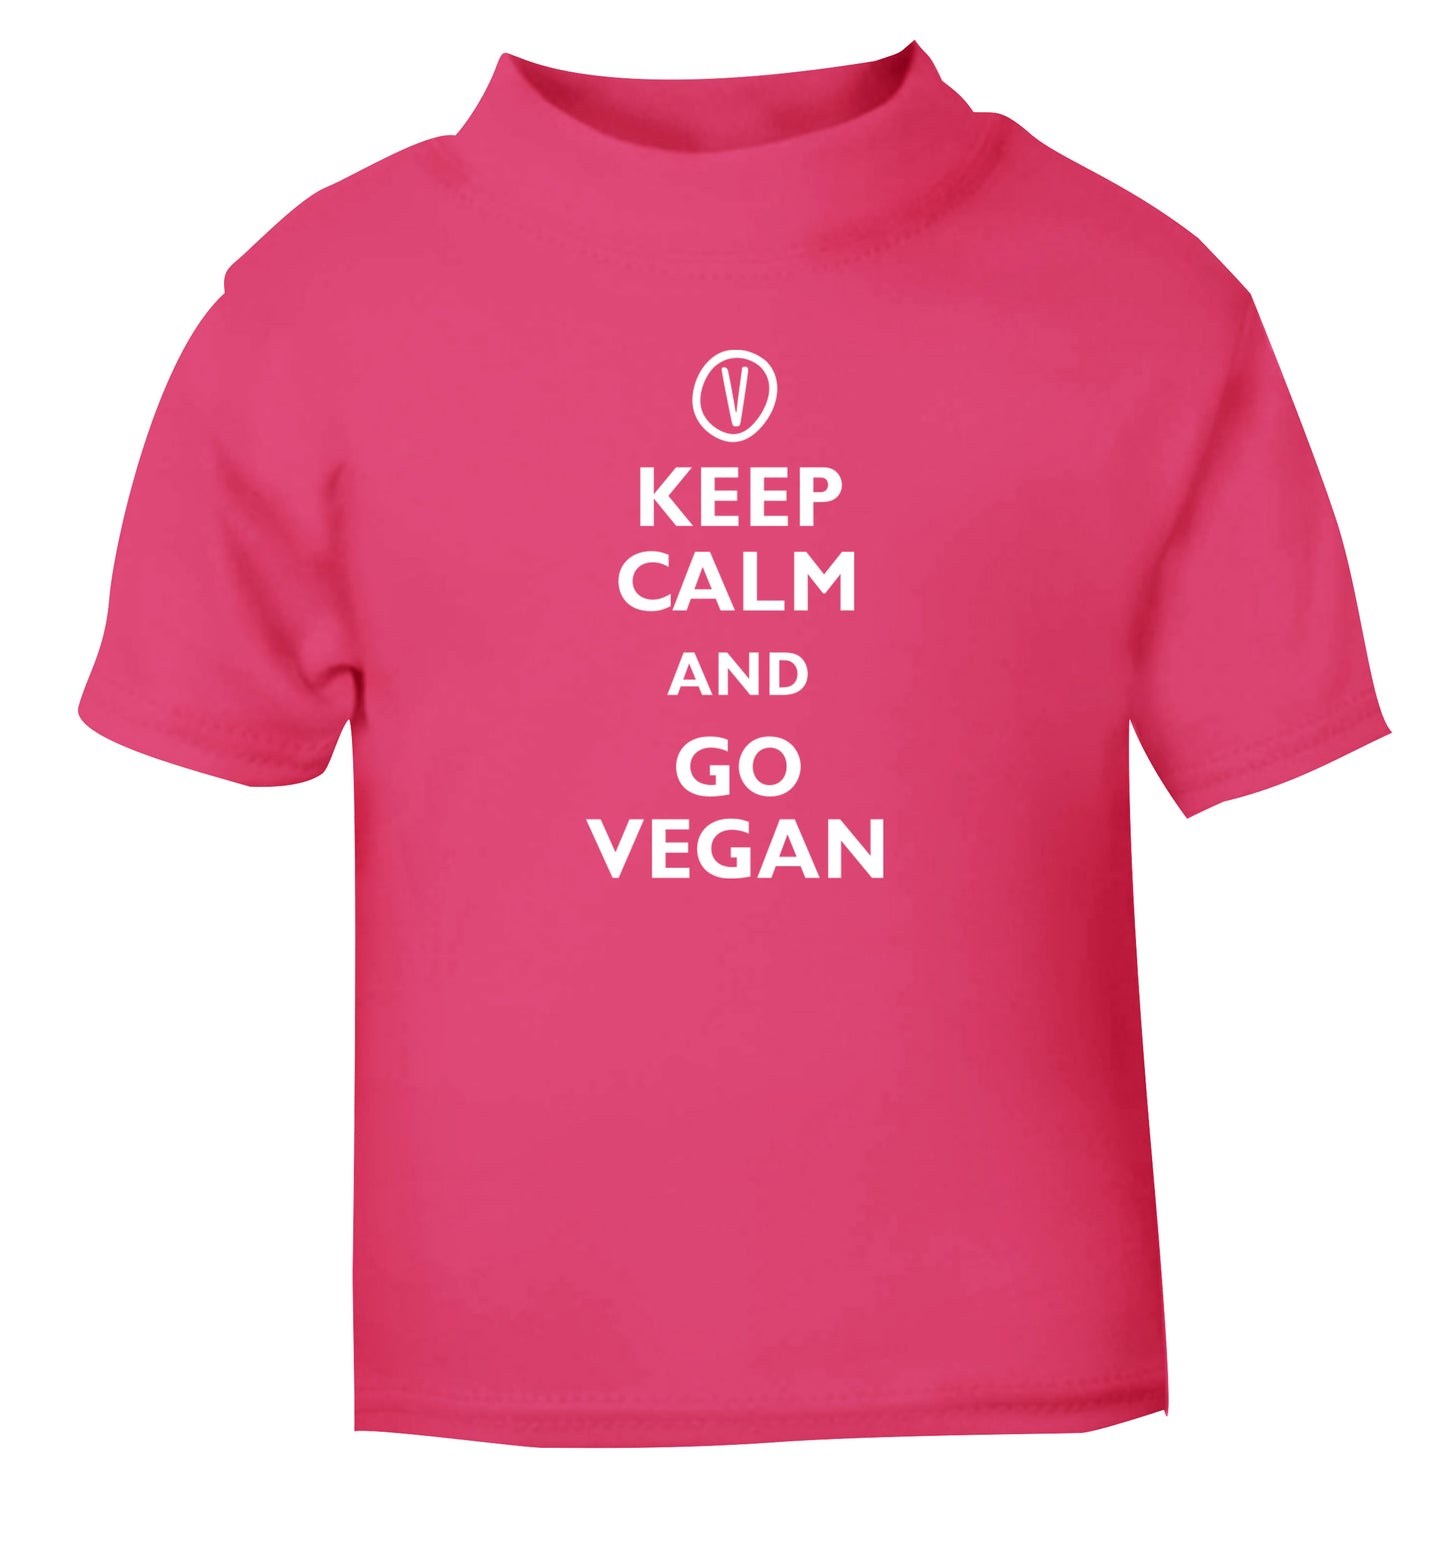 Keep calm and go vegan pink Baby Toddler Tshirt 2 Years